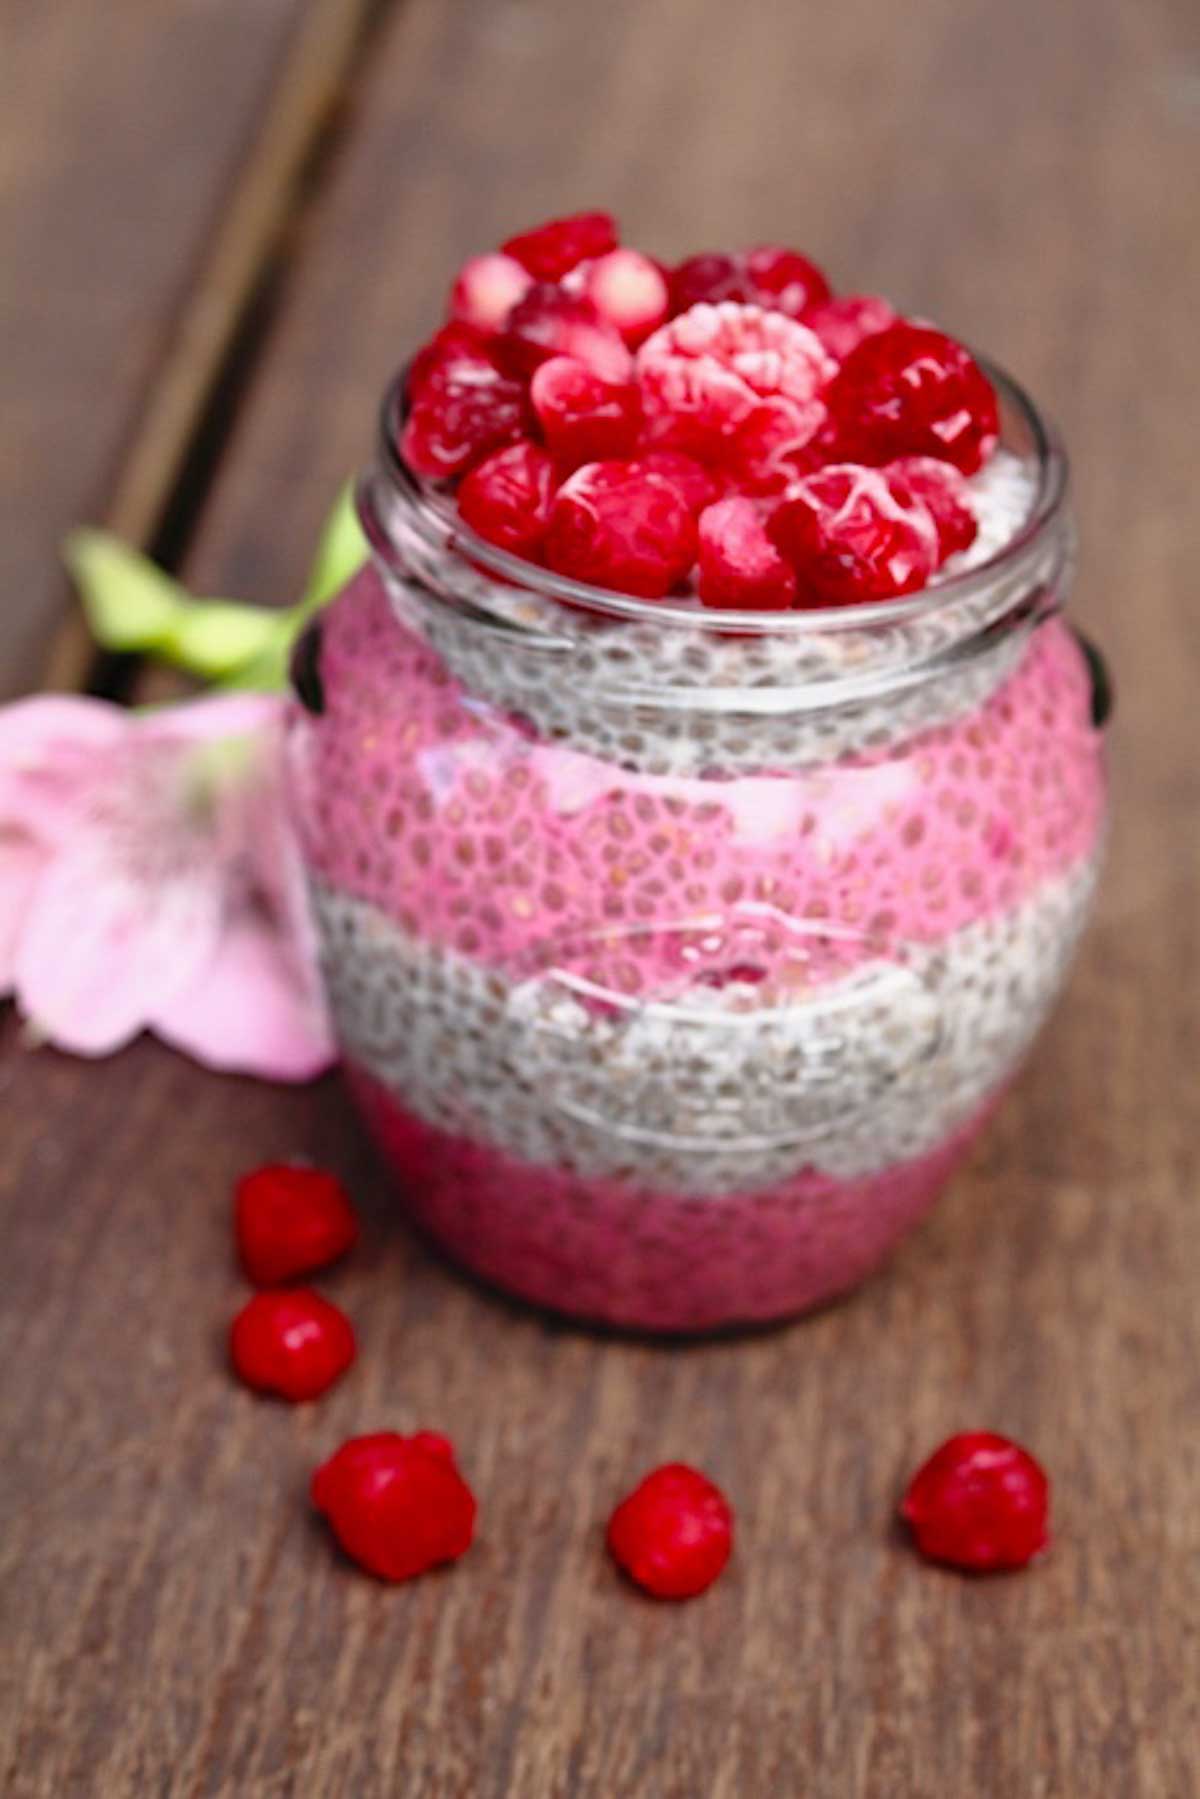 chia pudding made with berries.